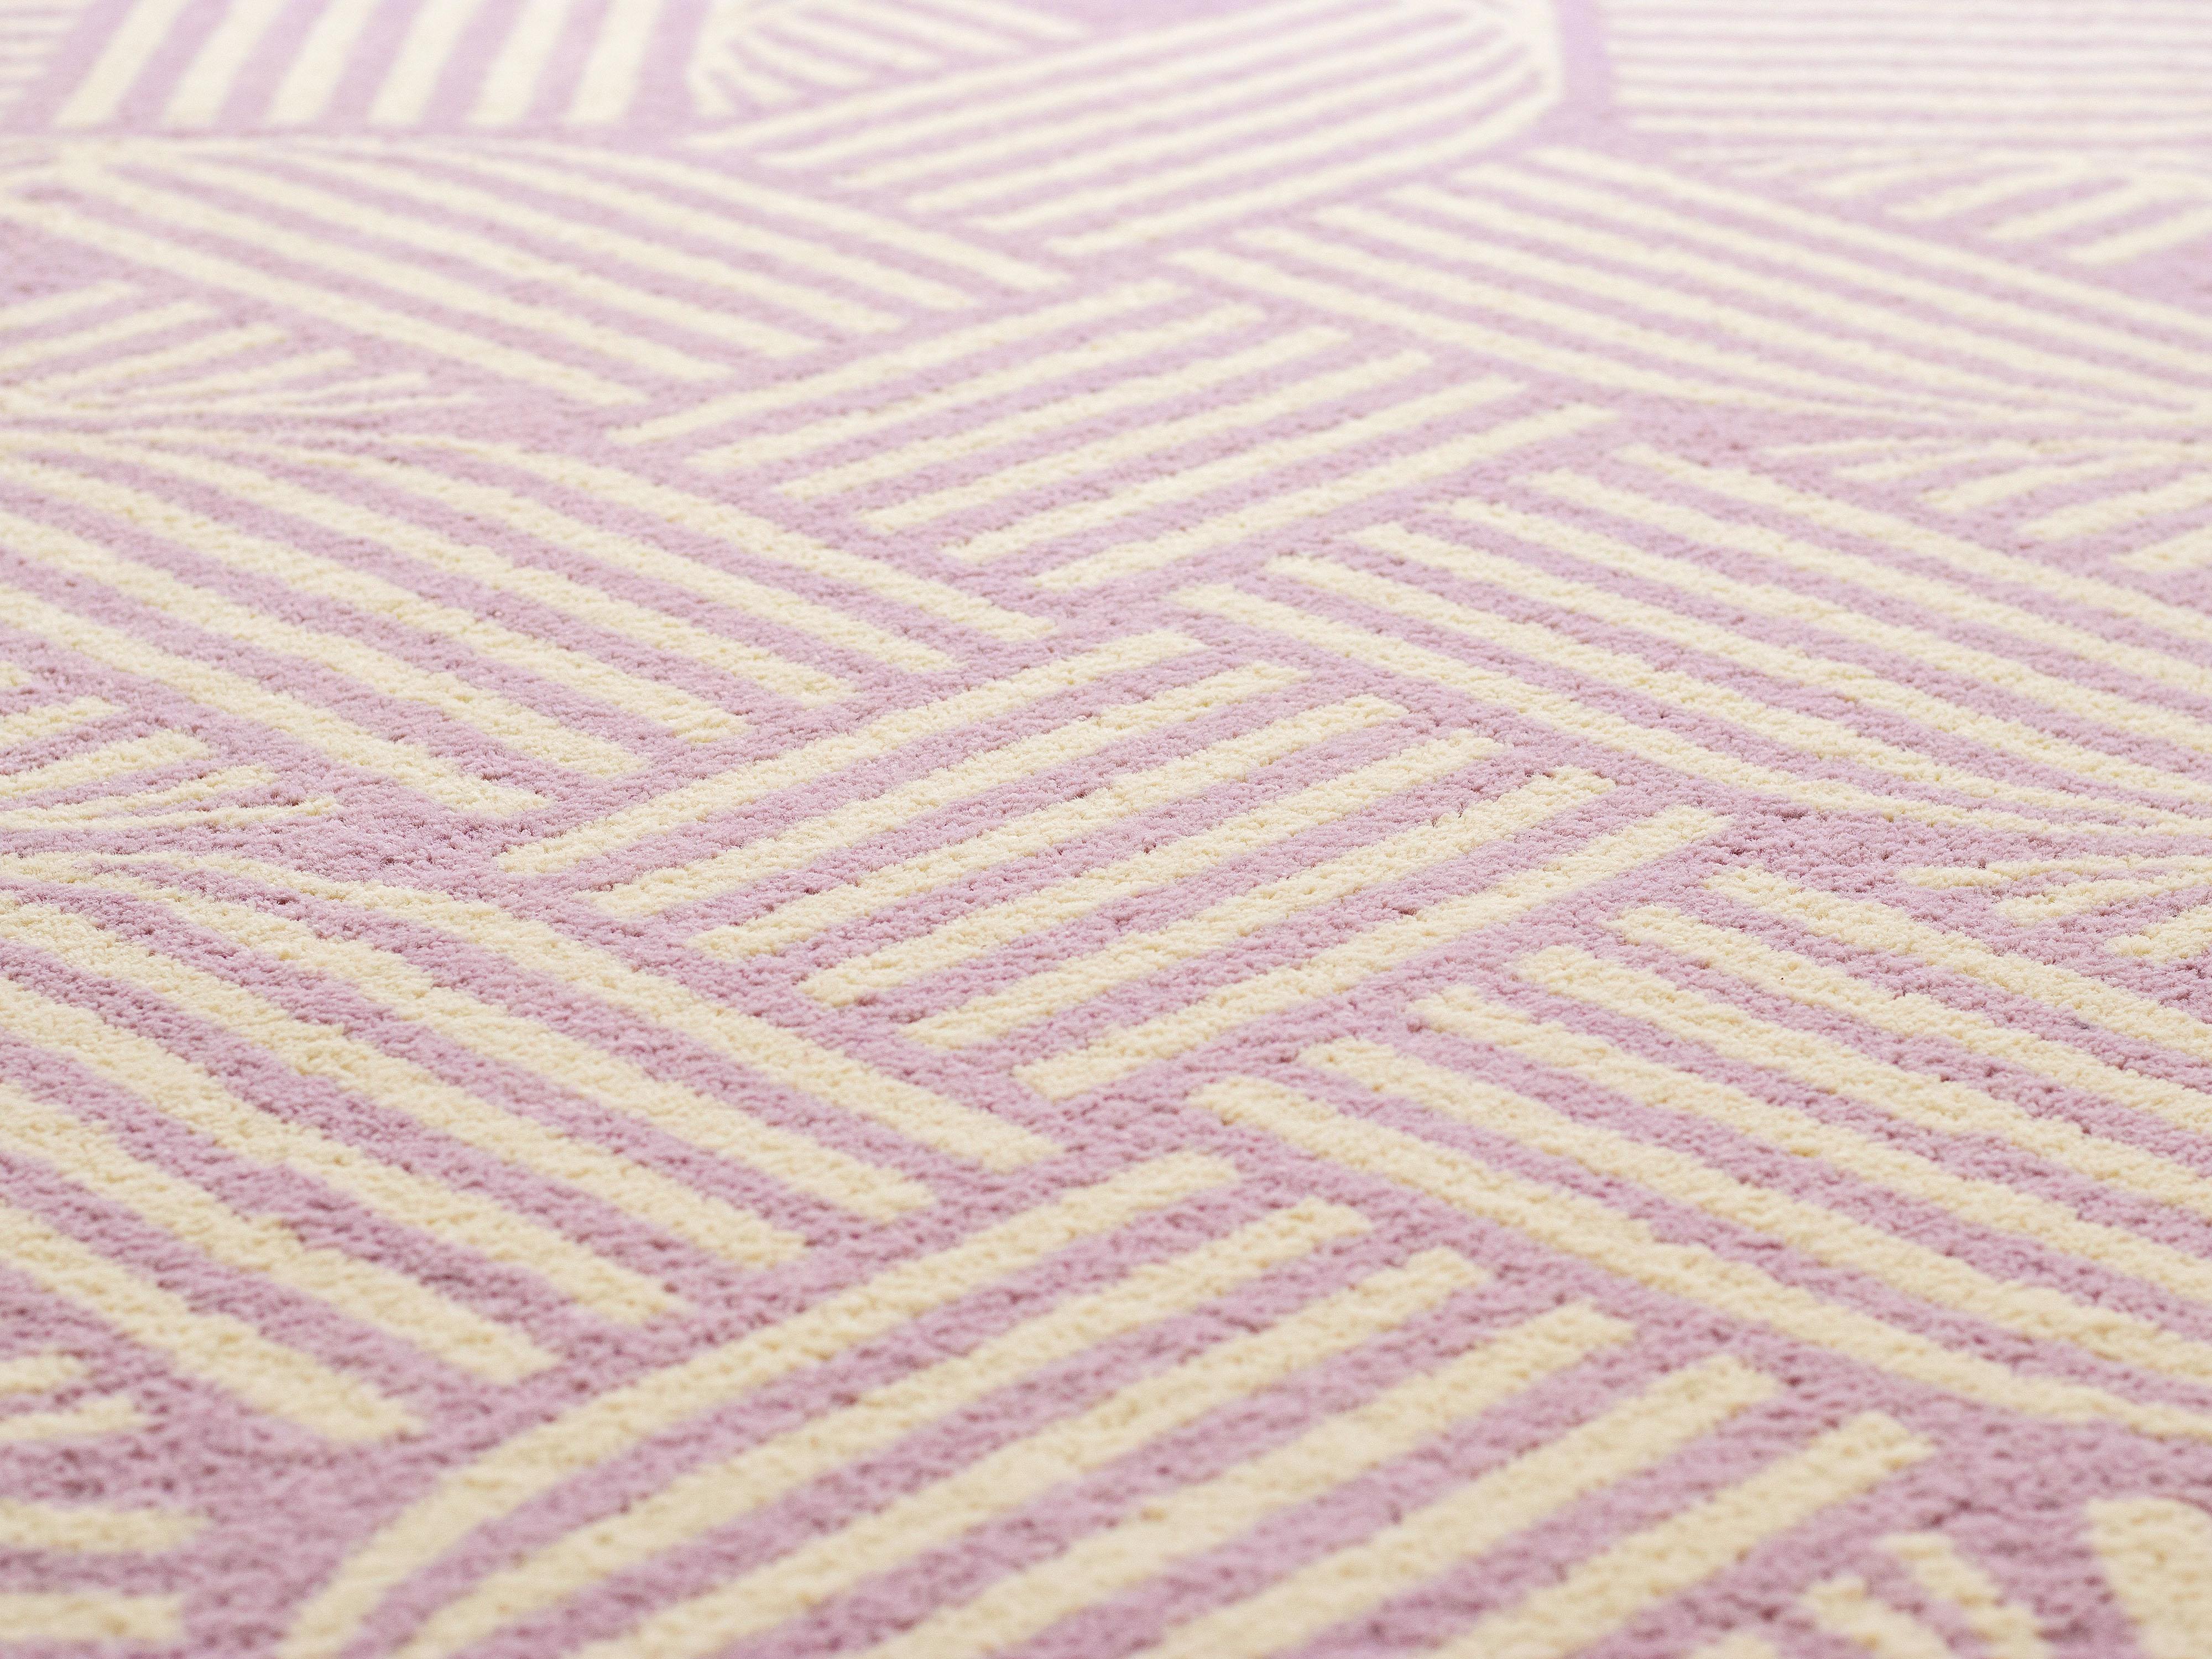 Lilac & off White Striped Laços Rug by Paulo Kobylka For Sale 4